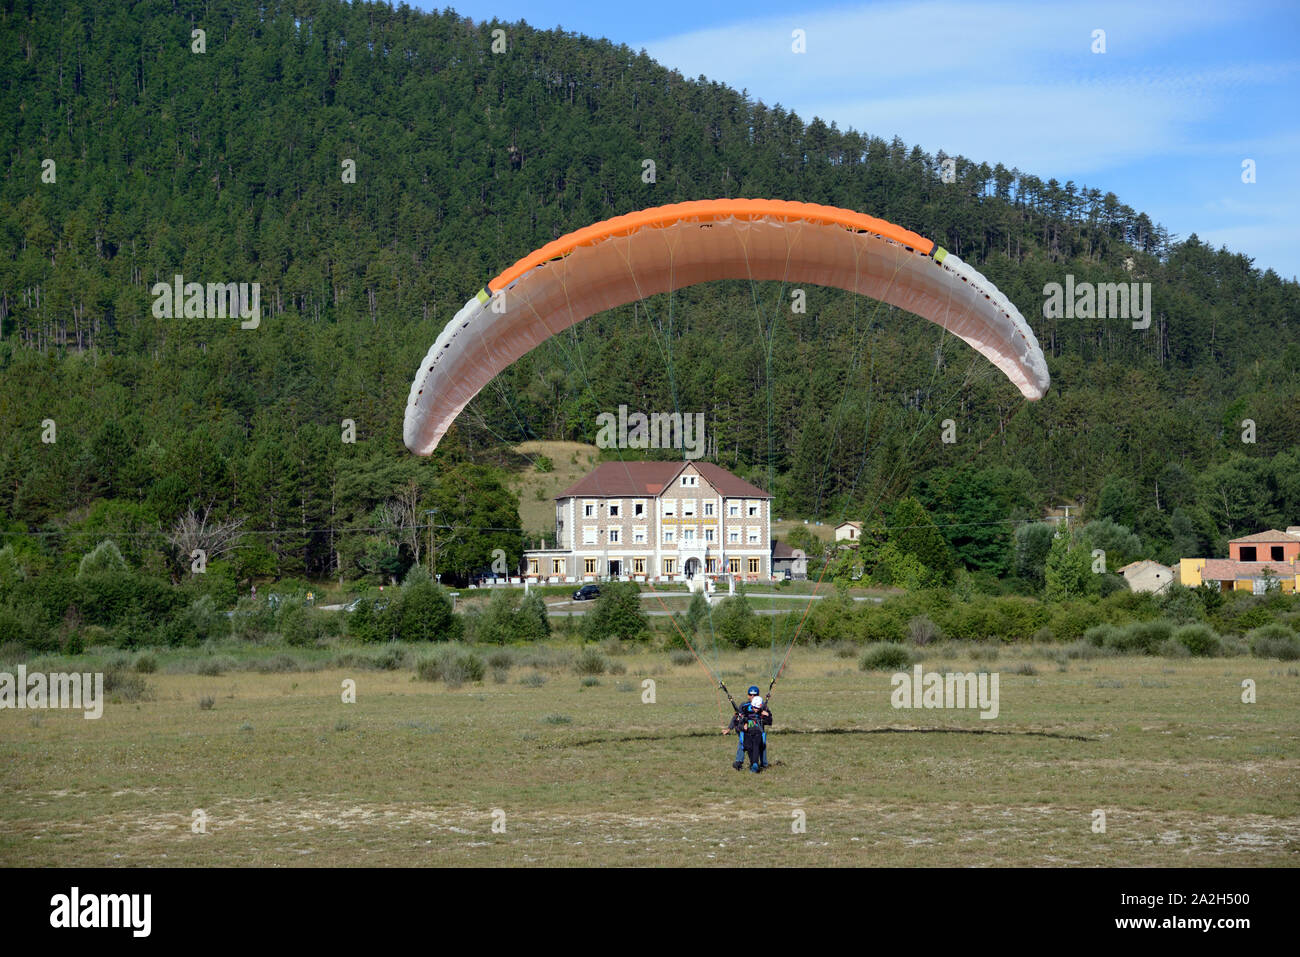 Hang Glider Landing at Saint-André-les-Alpes, with Historic Hotel in Background, in the Verdon Regional Park Alpes-de-Haute-Provence Provence France Stock Photo